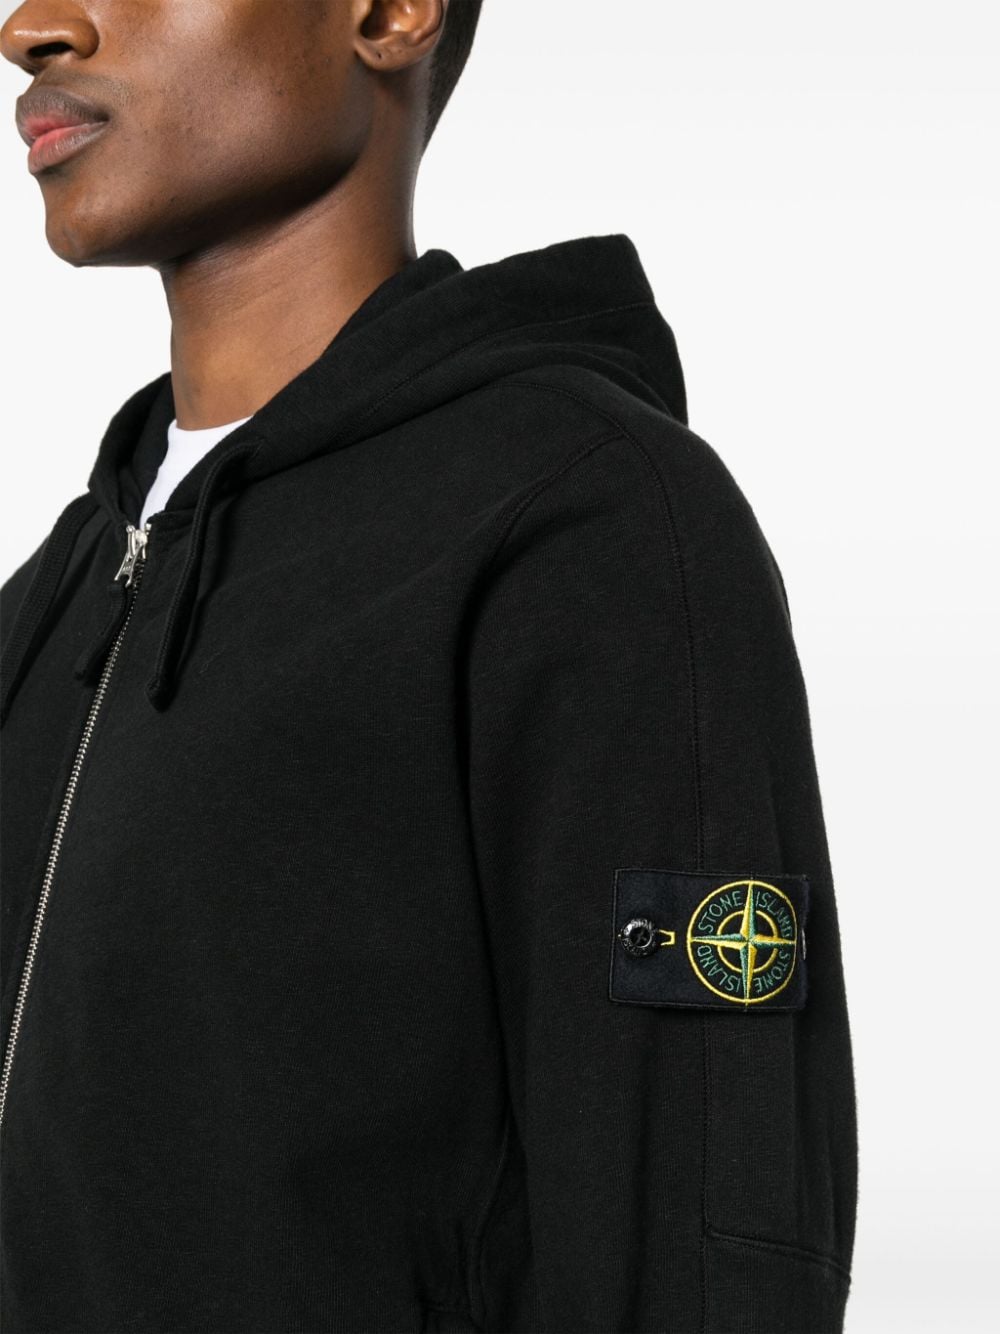 Black Compass-badge zipped hoodie<BR/><BR/><BR/>